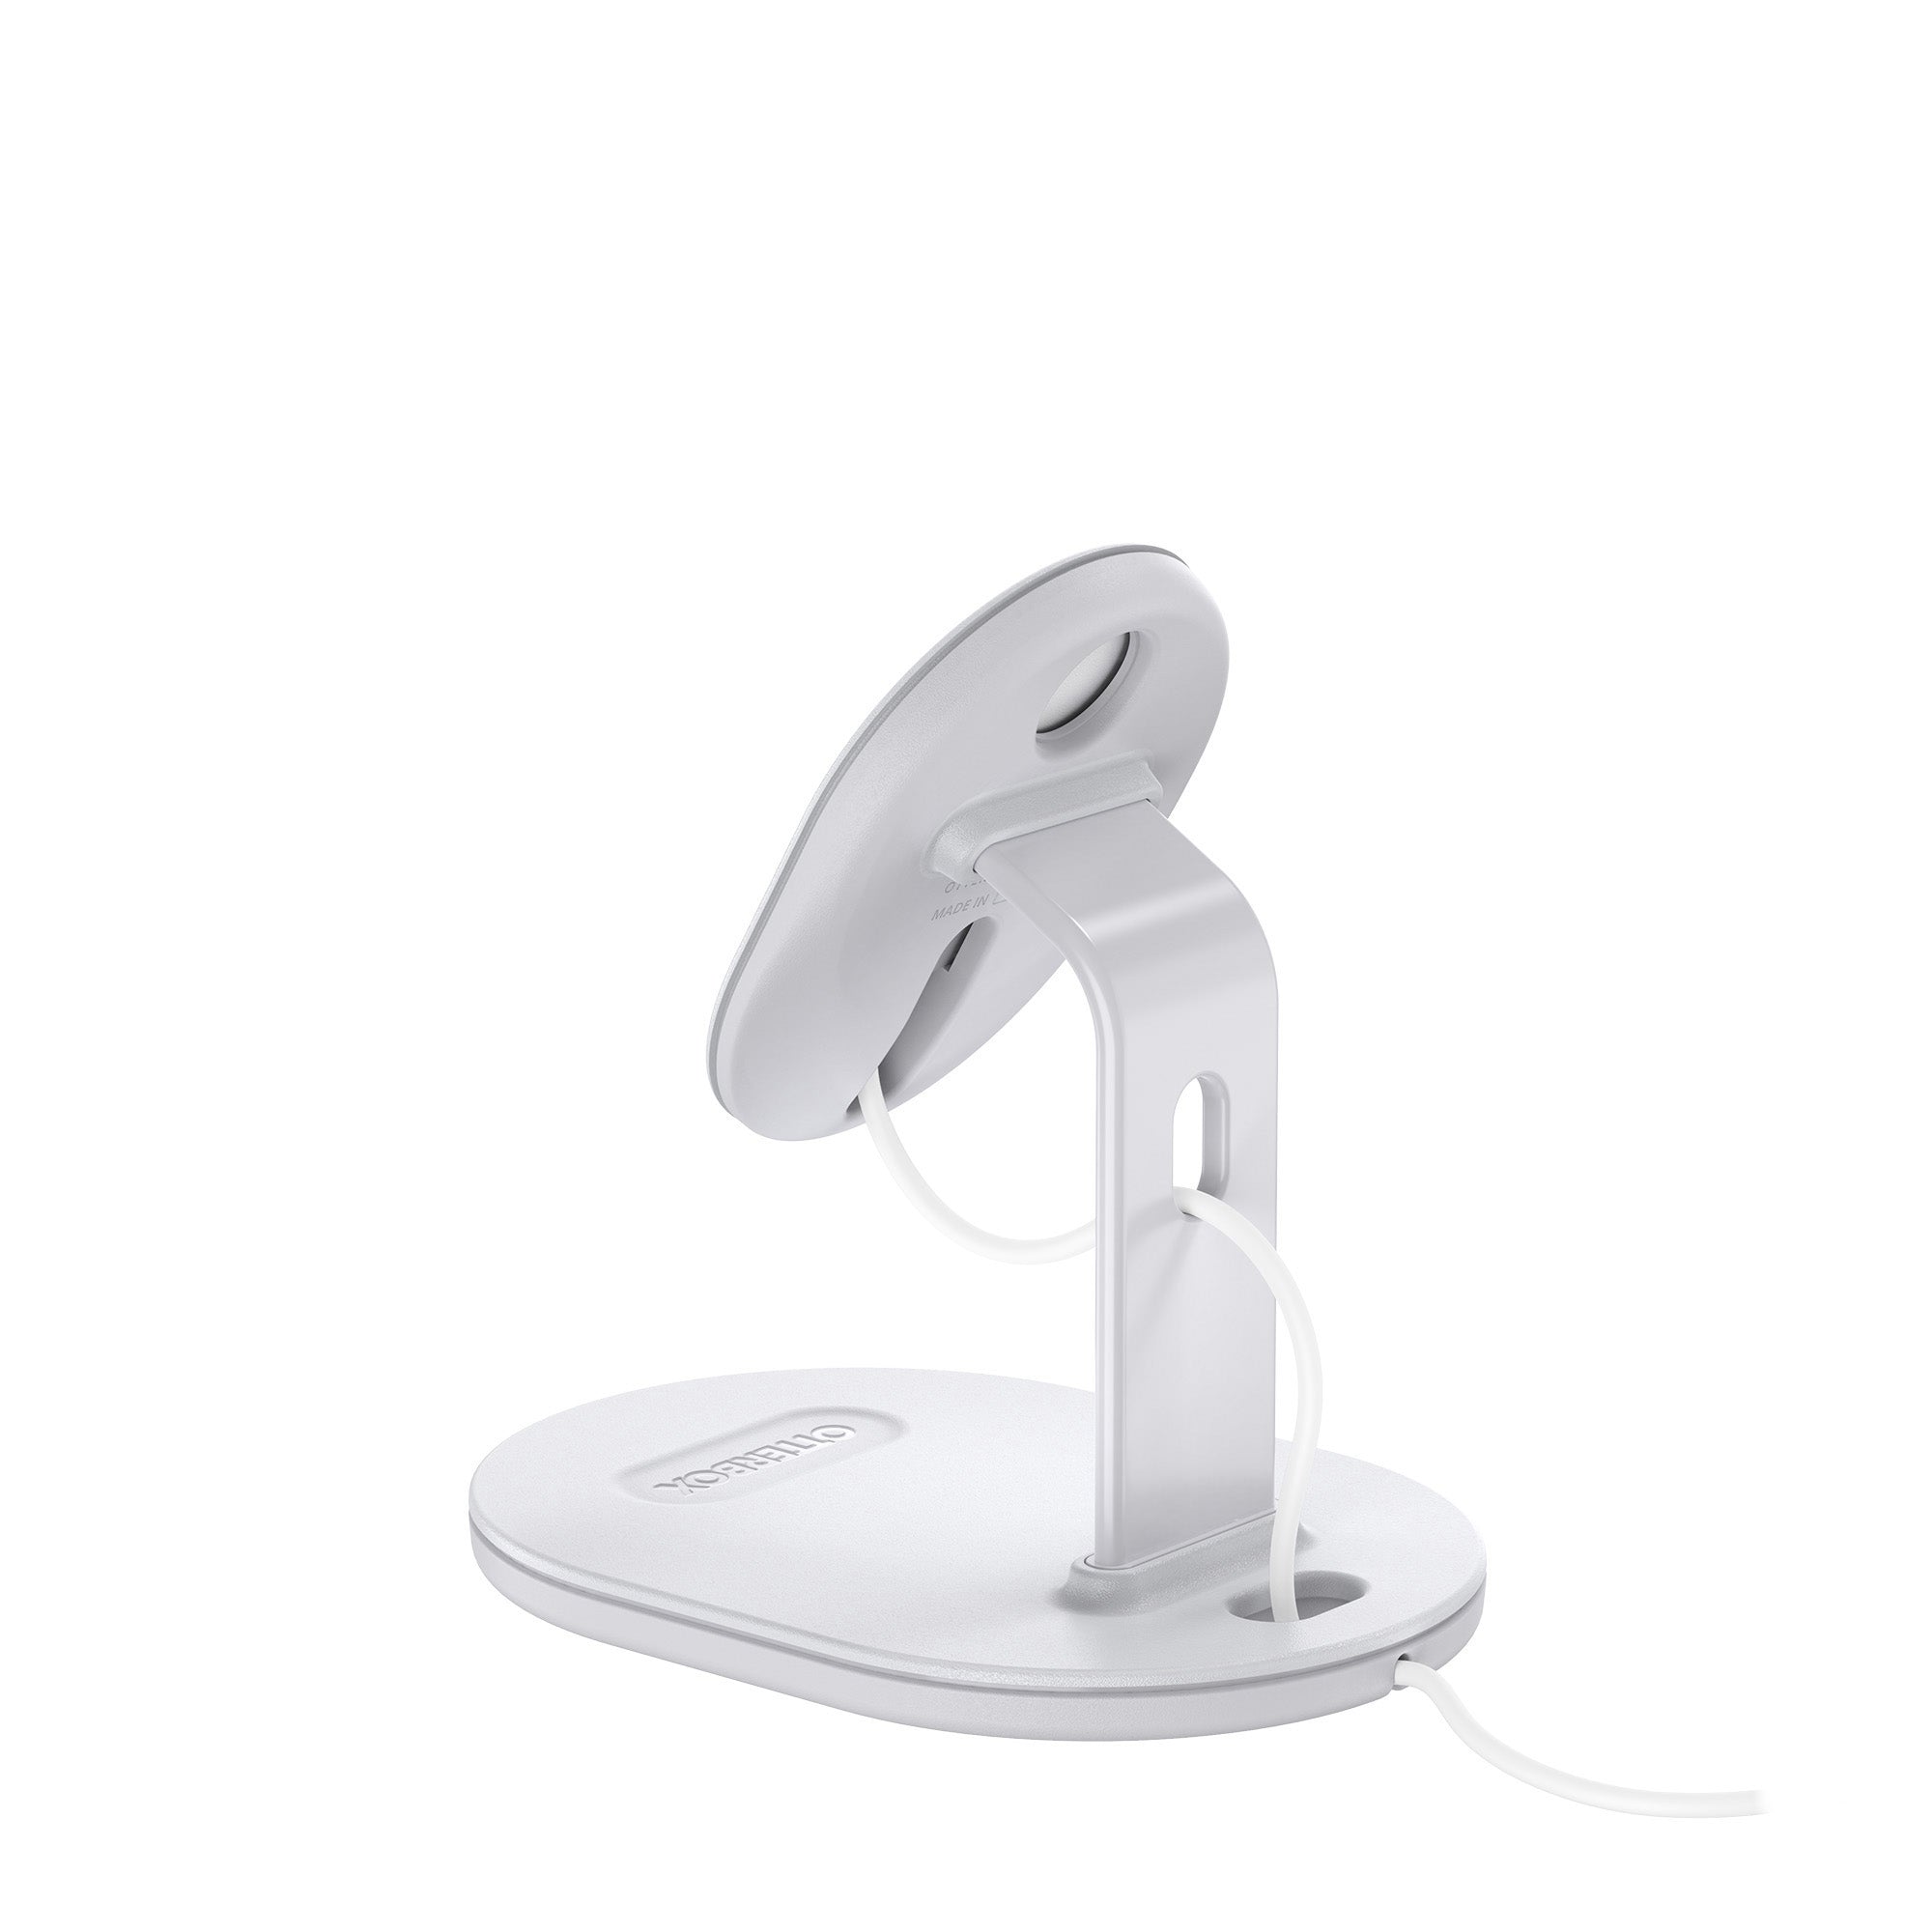 OtterBox Stand for MagSafe Charger - White - 15-09407